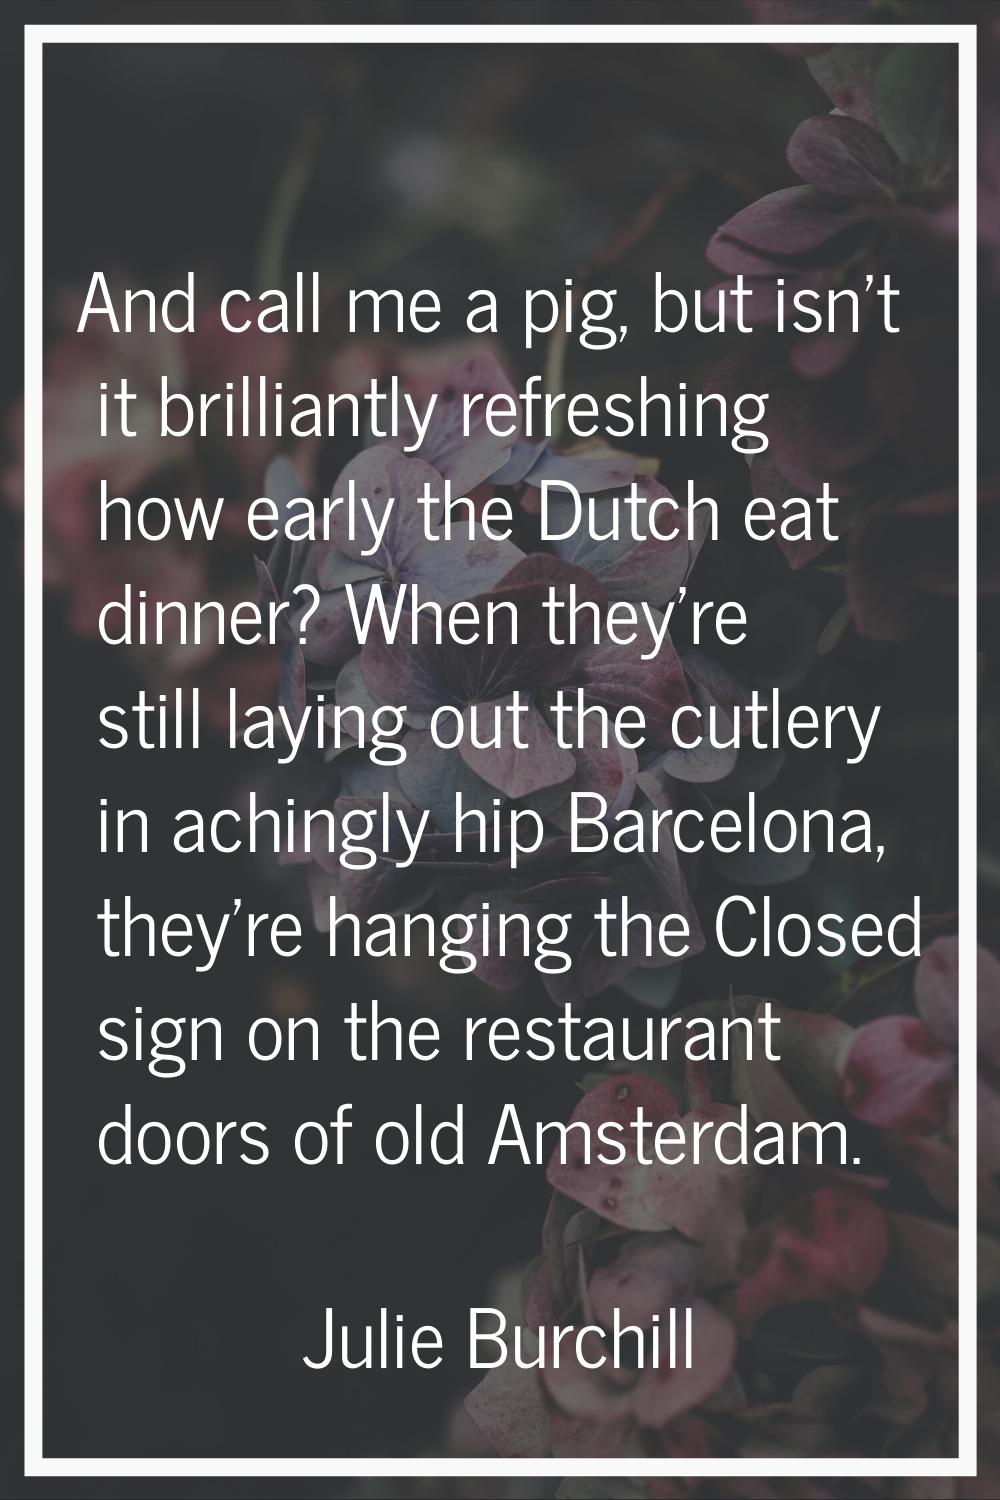 And call me a pig, but isn't it brilliantly refreshing how early the Dutch eat dinner? When they're